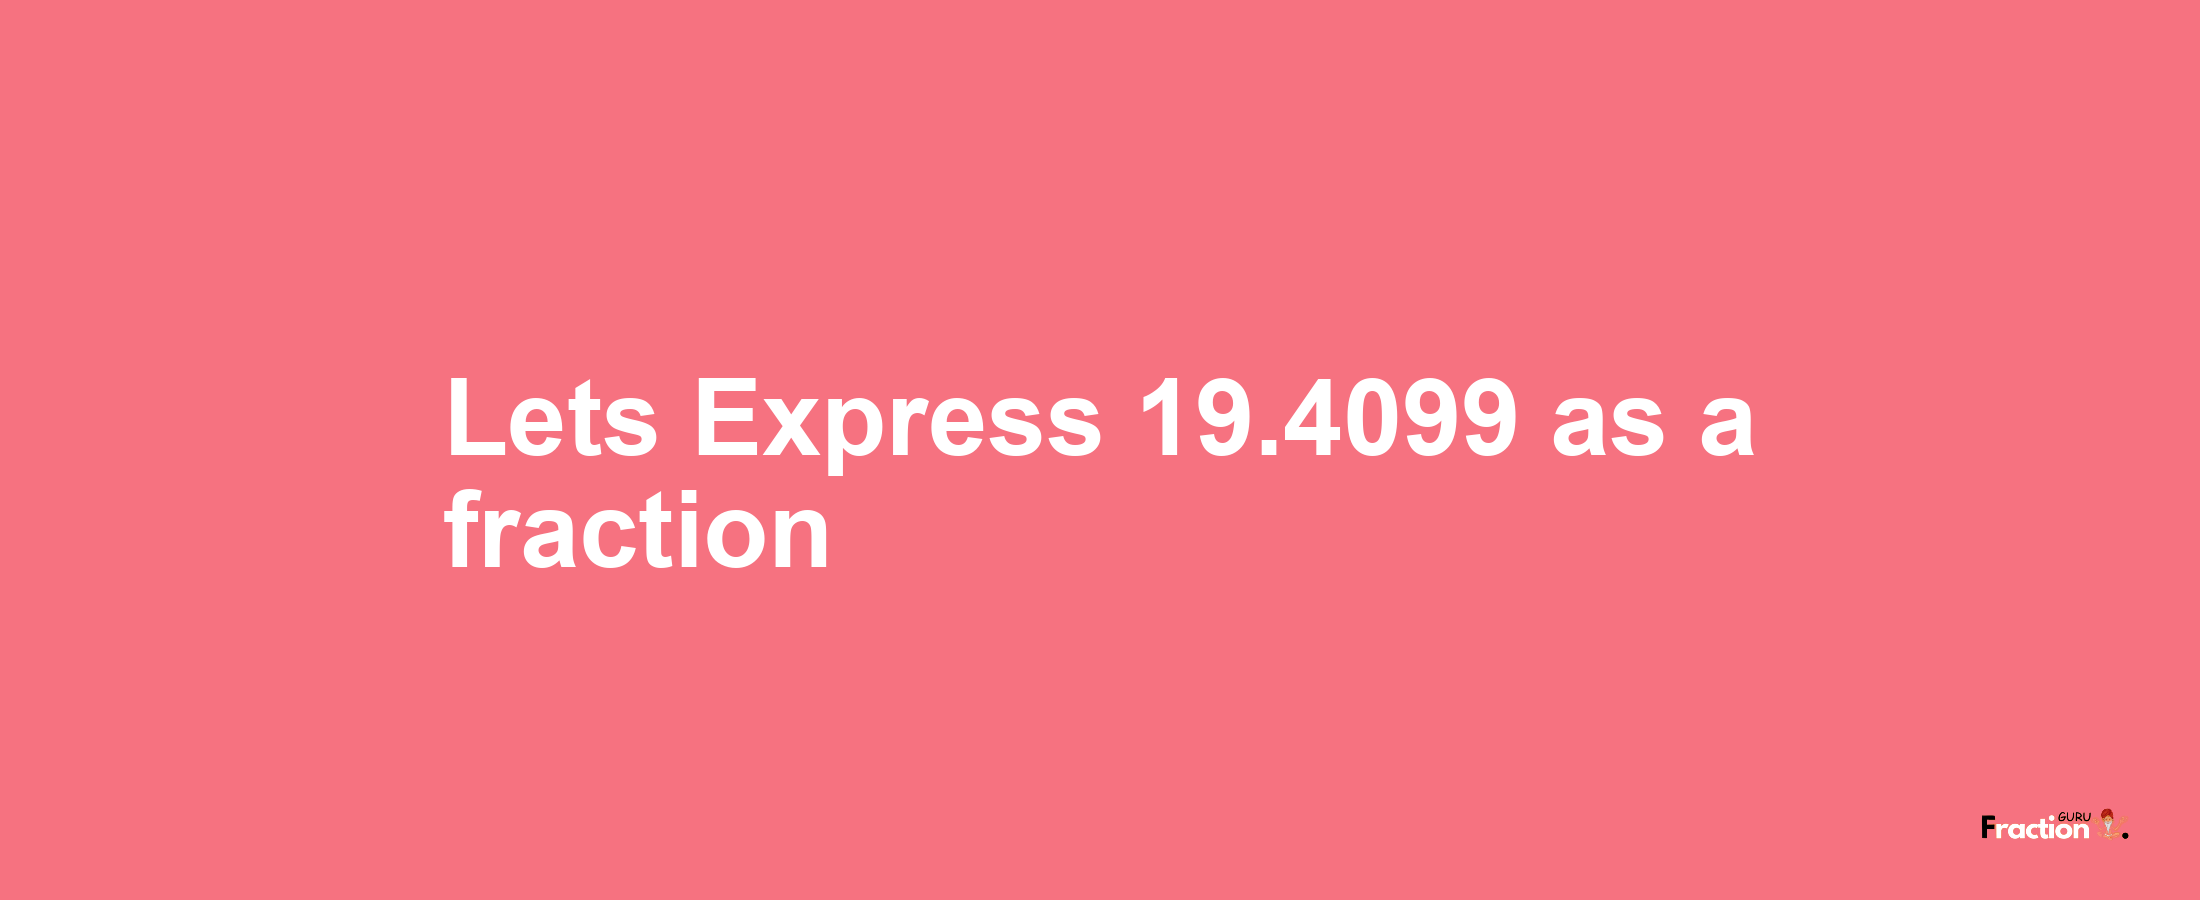 Lets Express 19.4099 as afraction